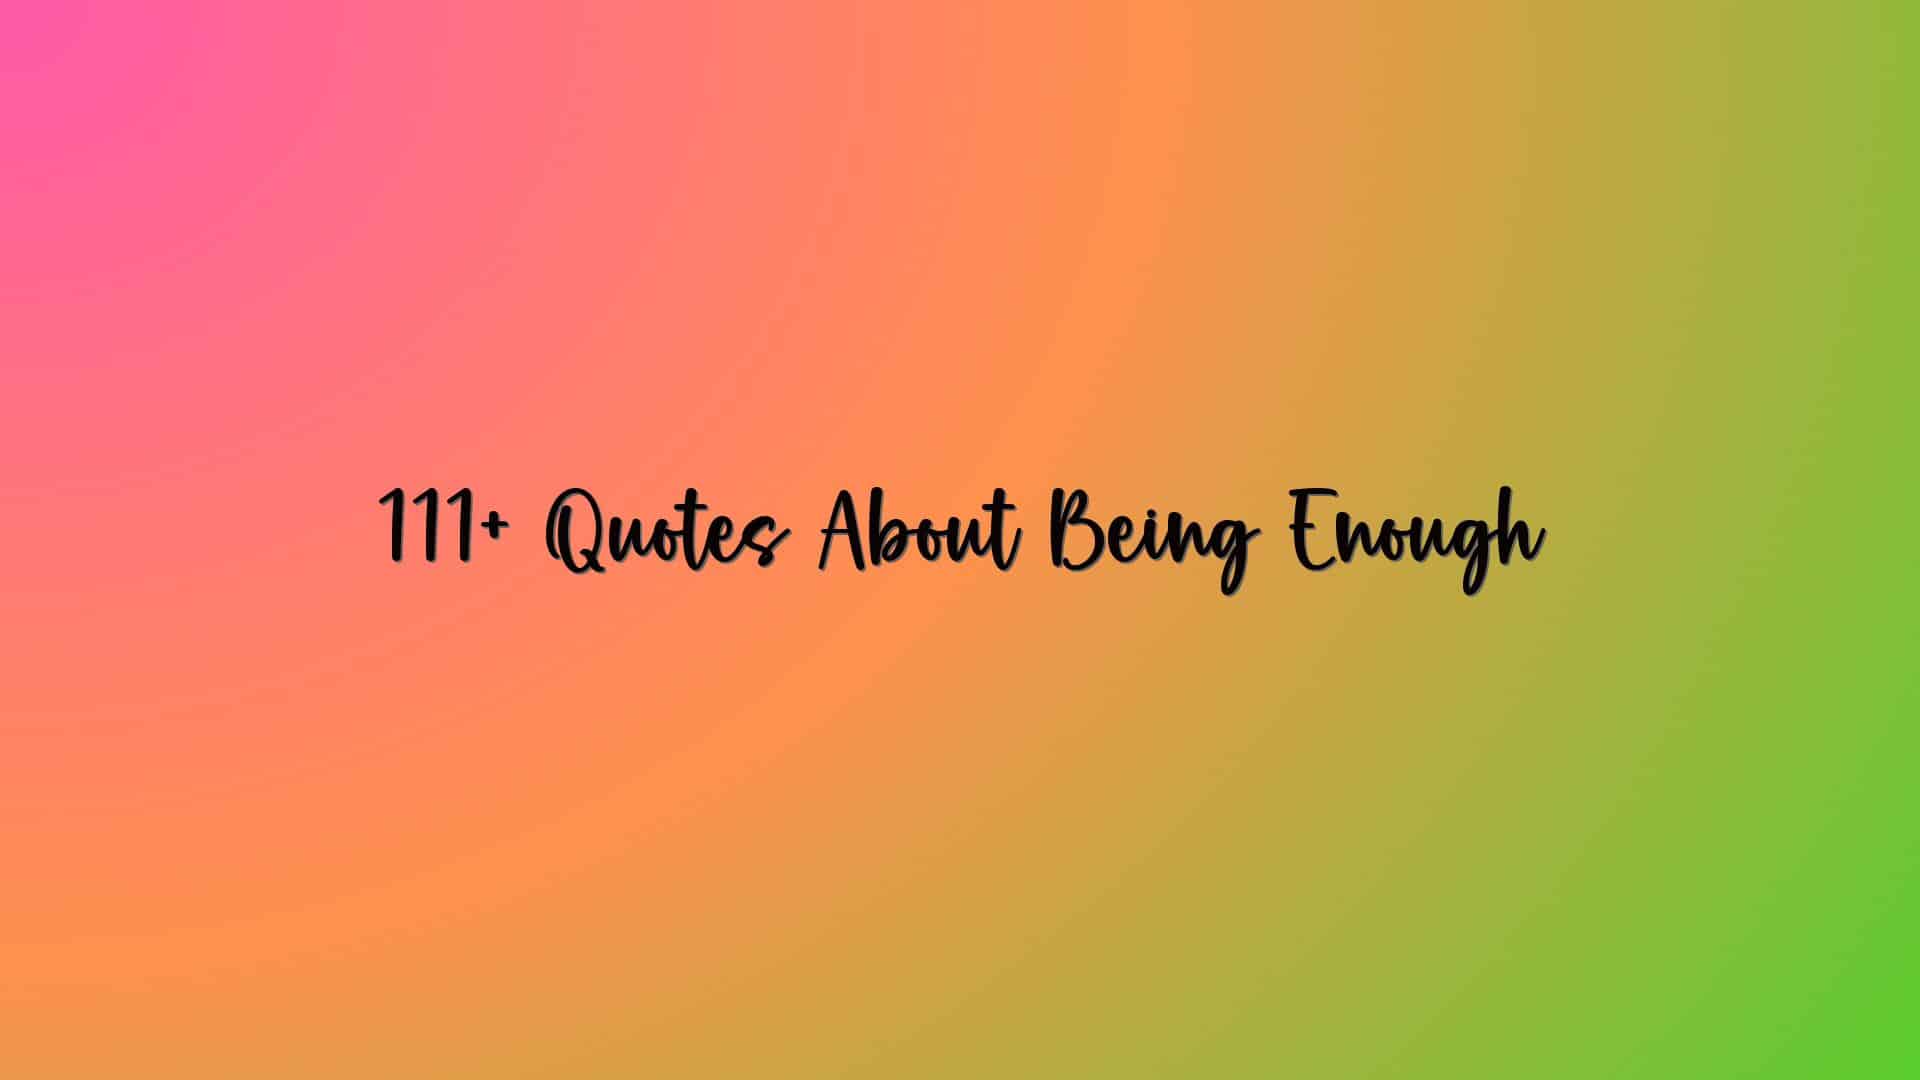 111+ Quotes About Being Enough